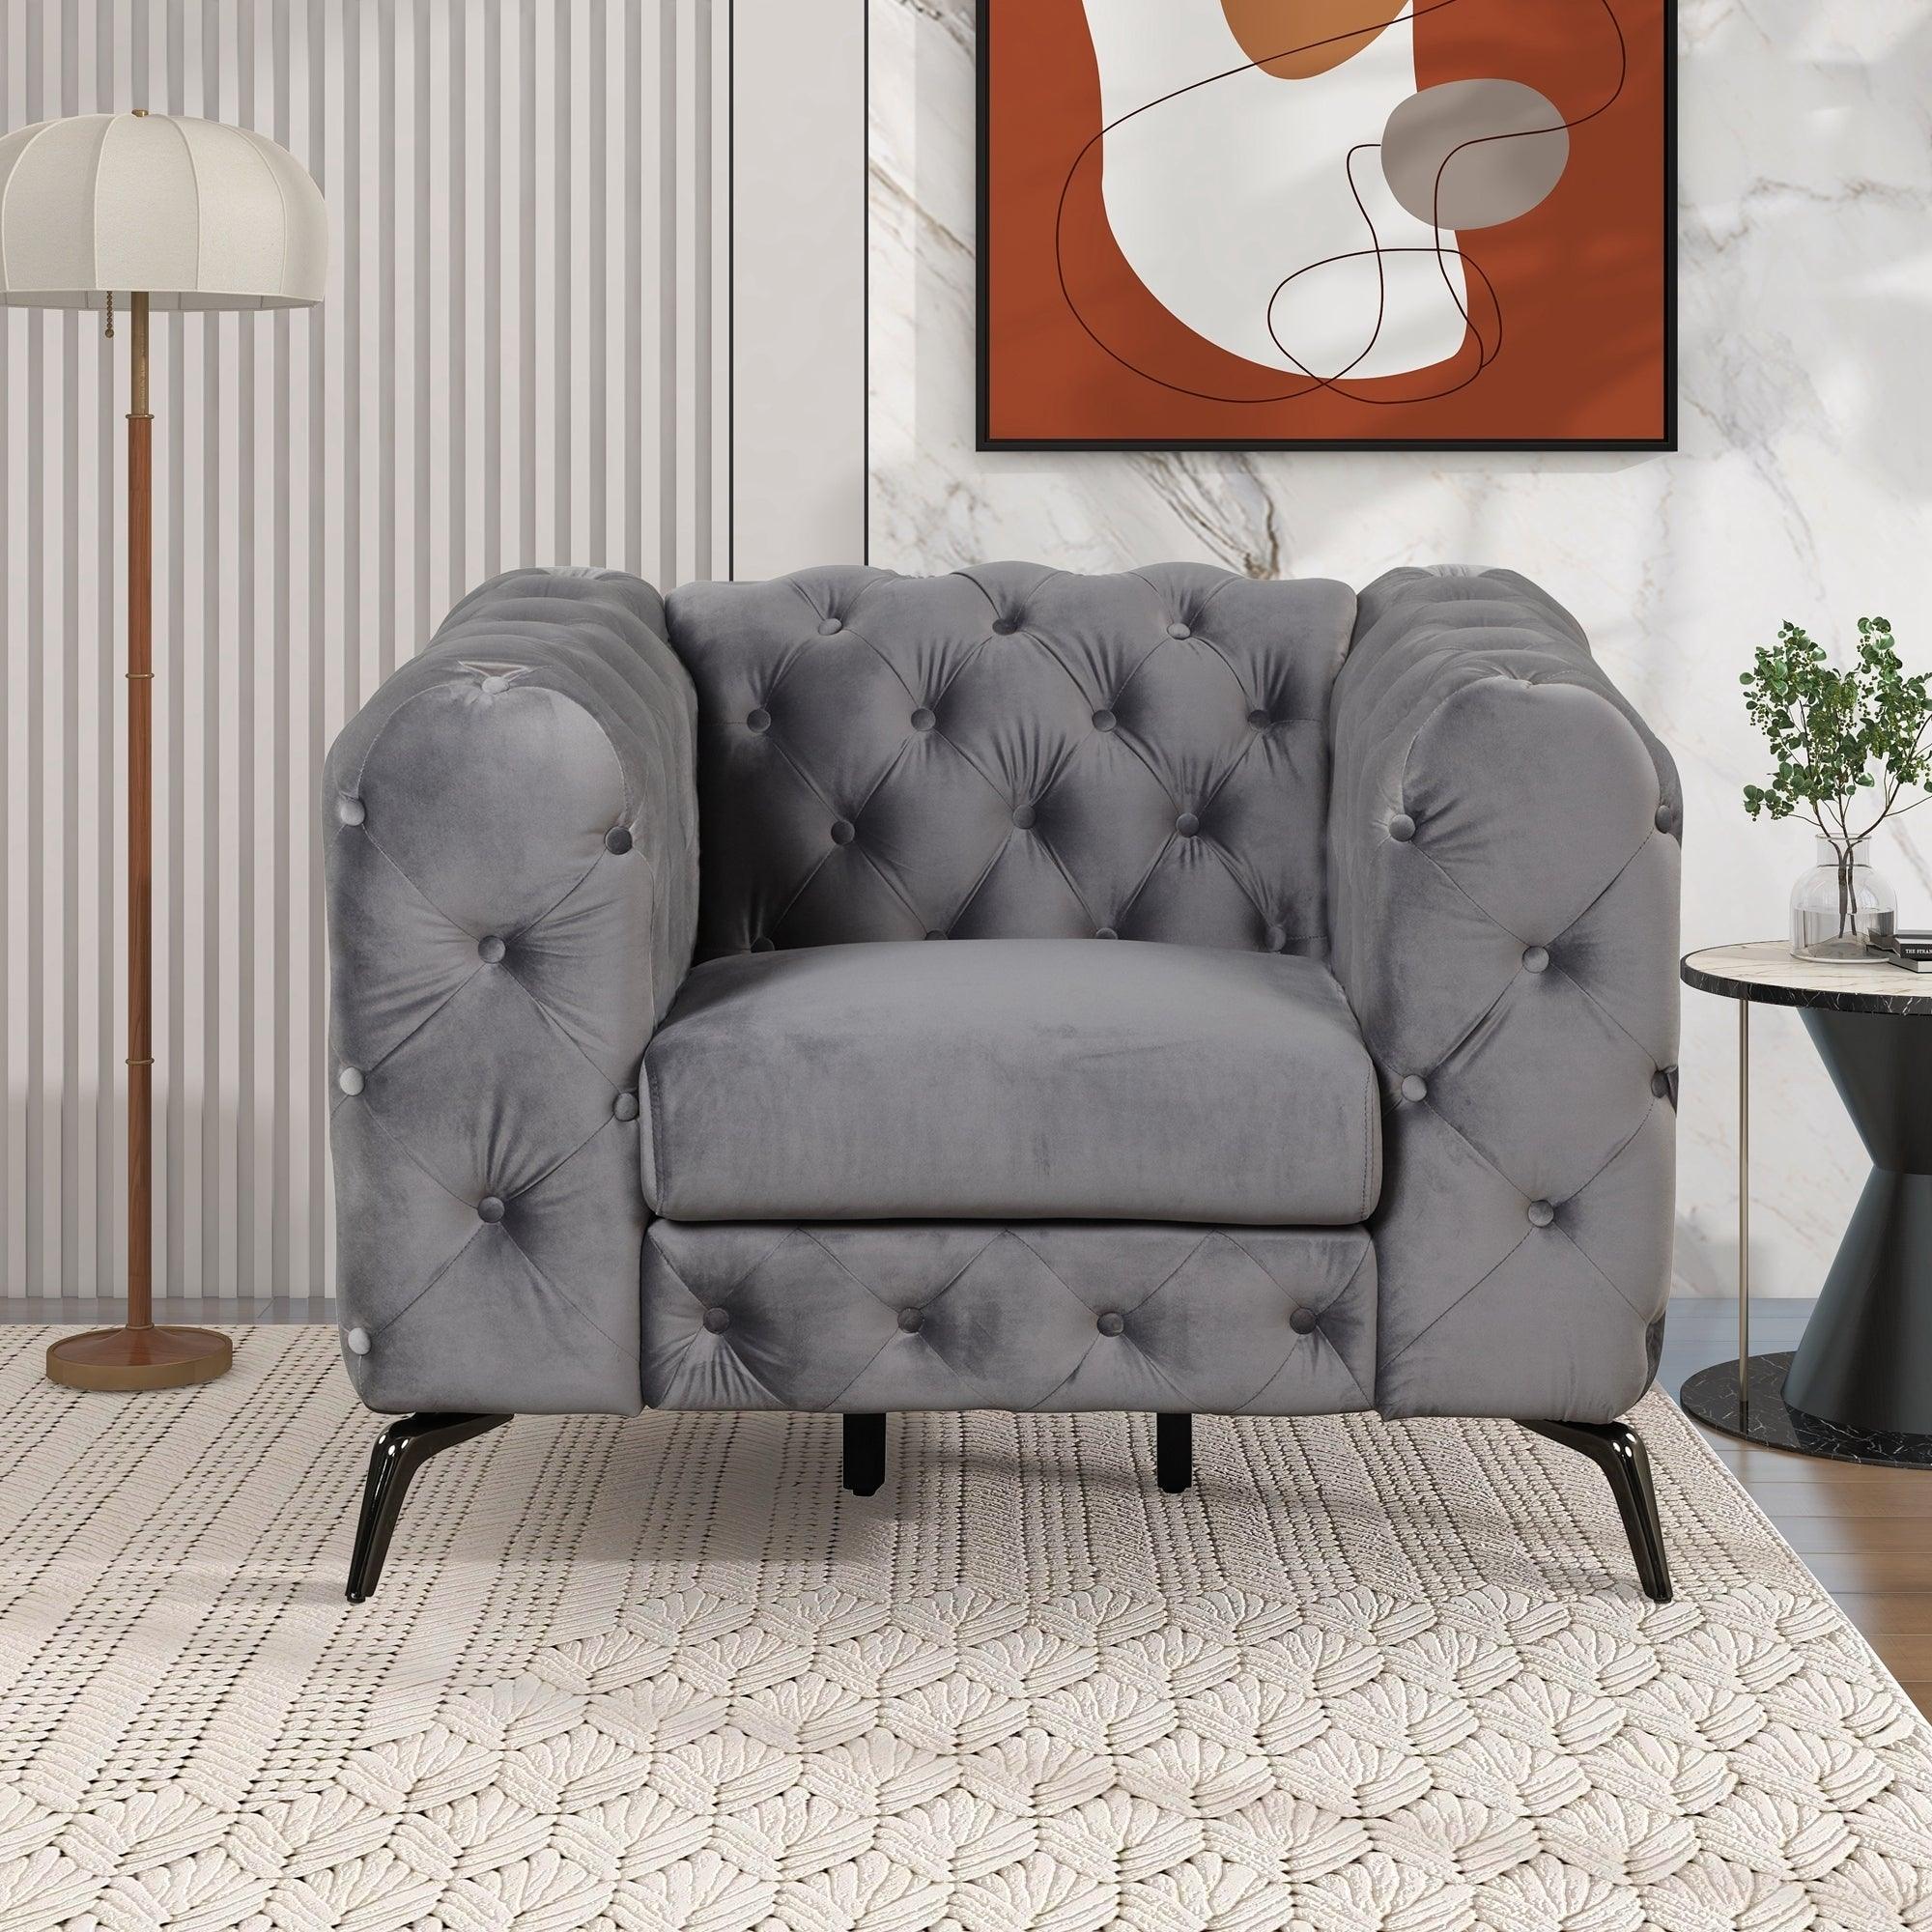 40.5" Velvet Upholstered Accent Sofa, Modern Single Sofa Chair With Button Tufted Back, Modern Single Couch For Living Room, Bedroom, Or Small Space, Gray